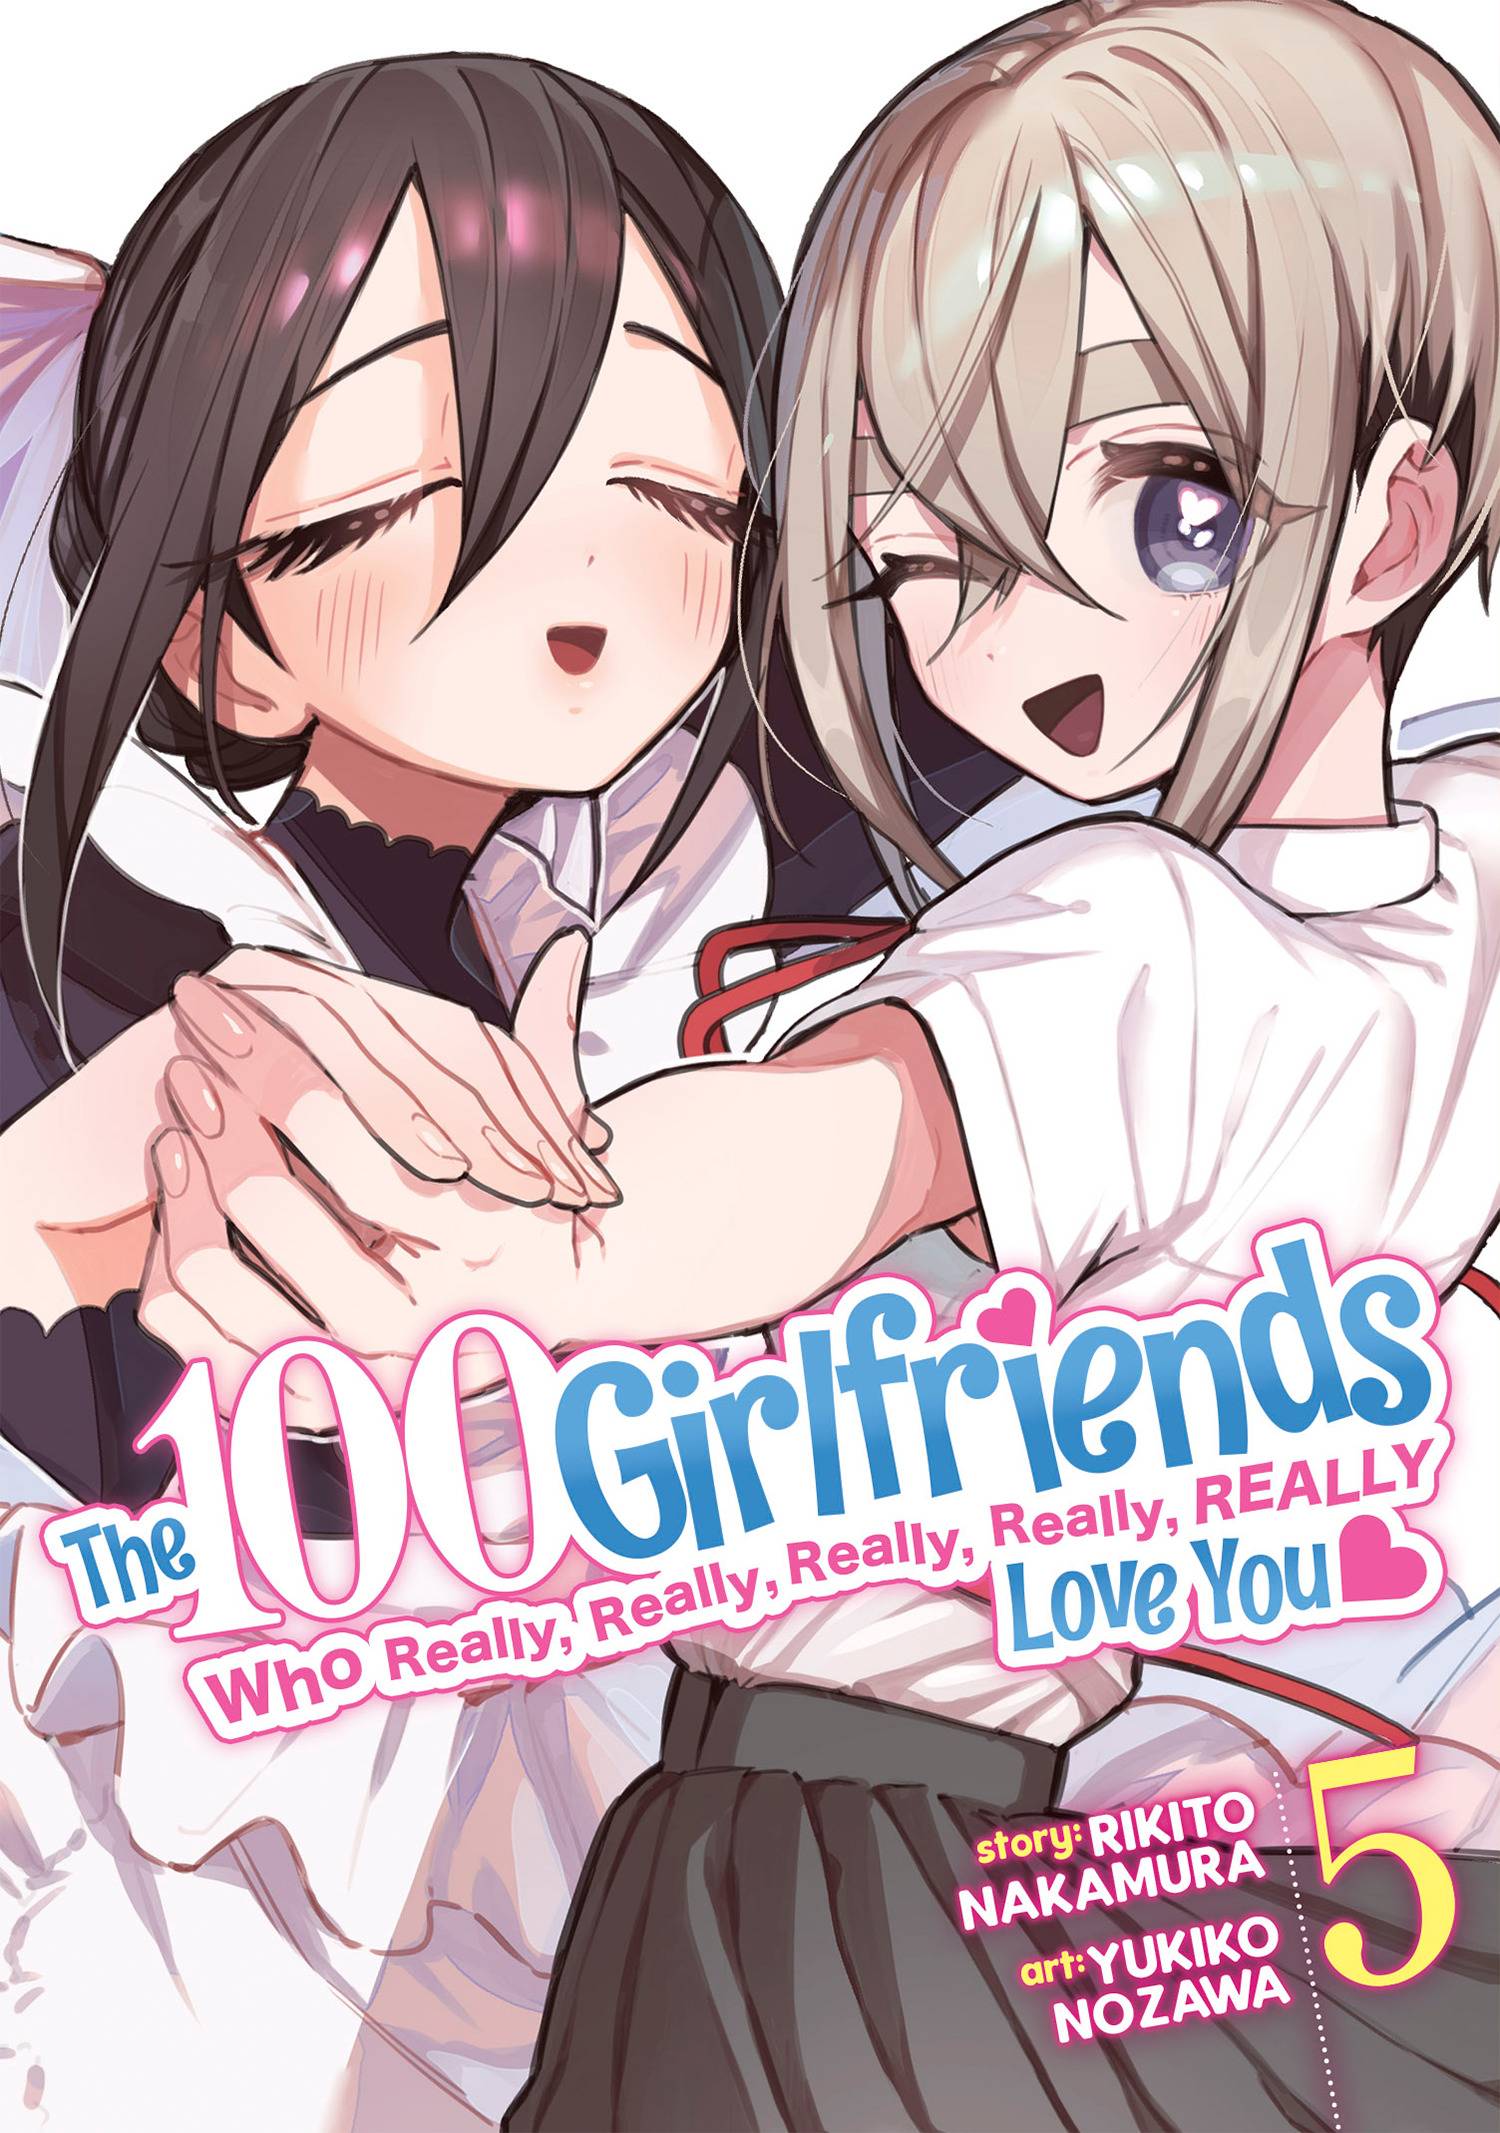 100 GIRLFRIENDS WHO REALLY LOVE YOU GN 05